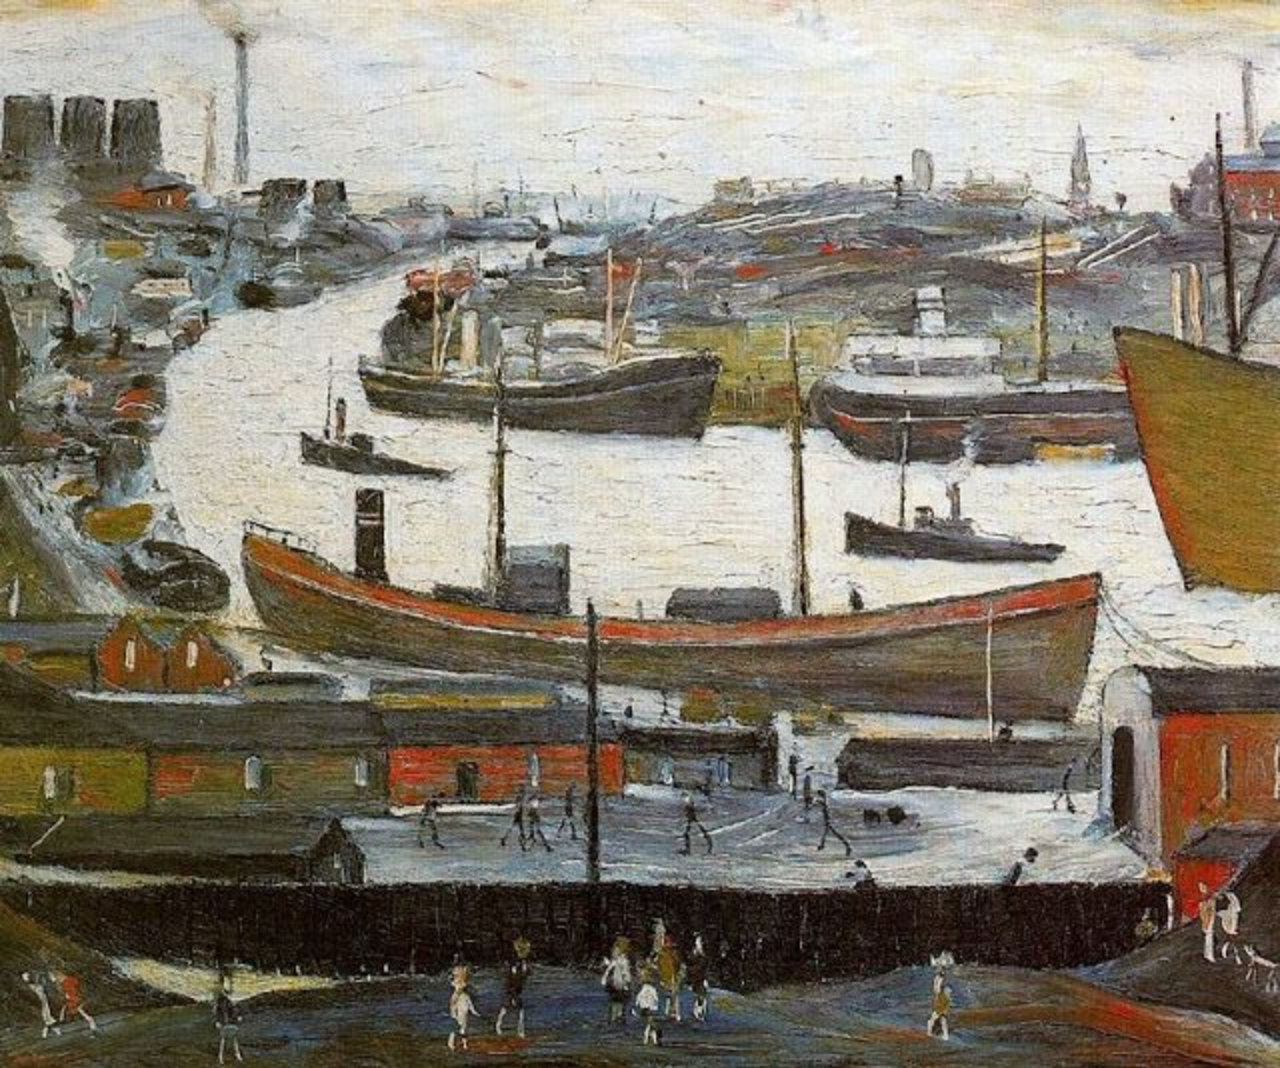 River Wear at Sunderland (1961) by Laurence Stephen Lowry (1887 - 1976), English artist.